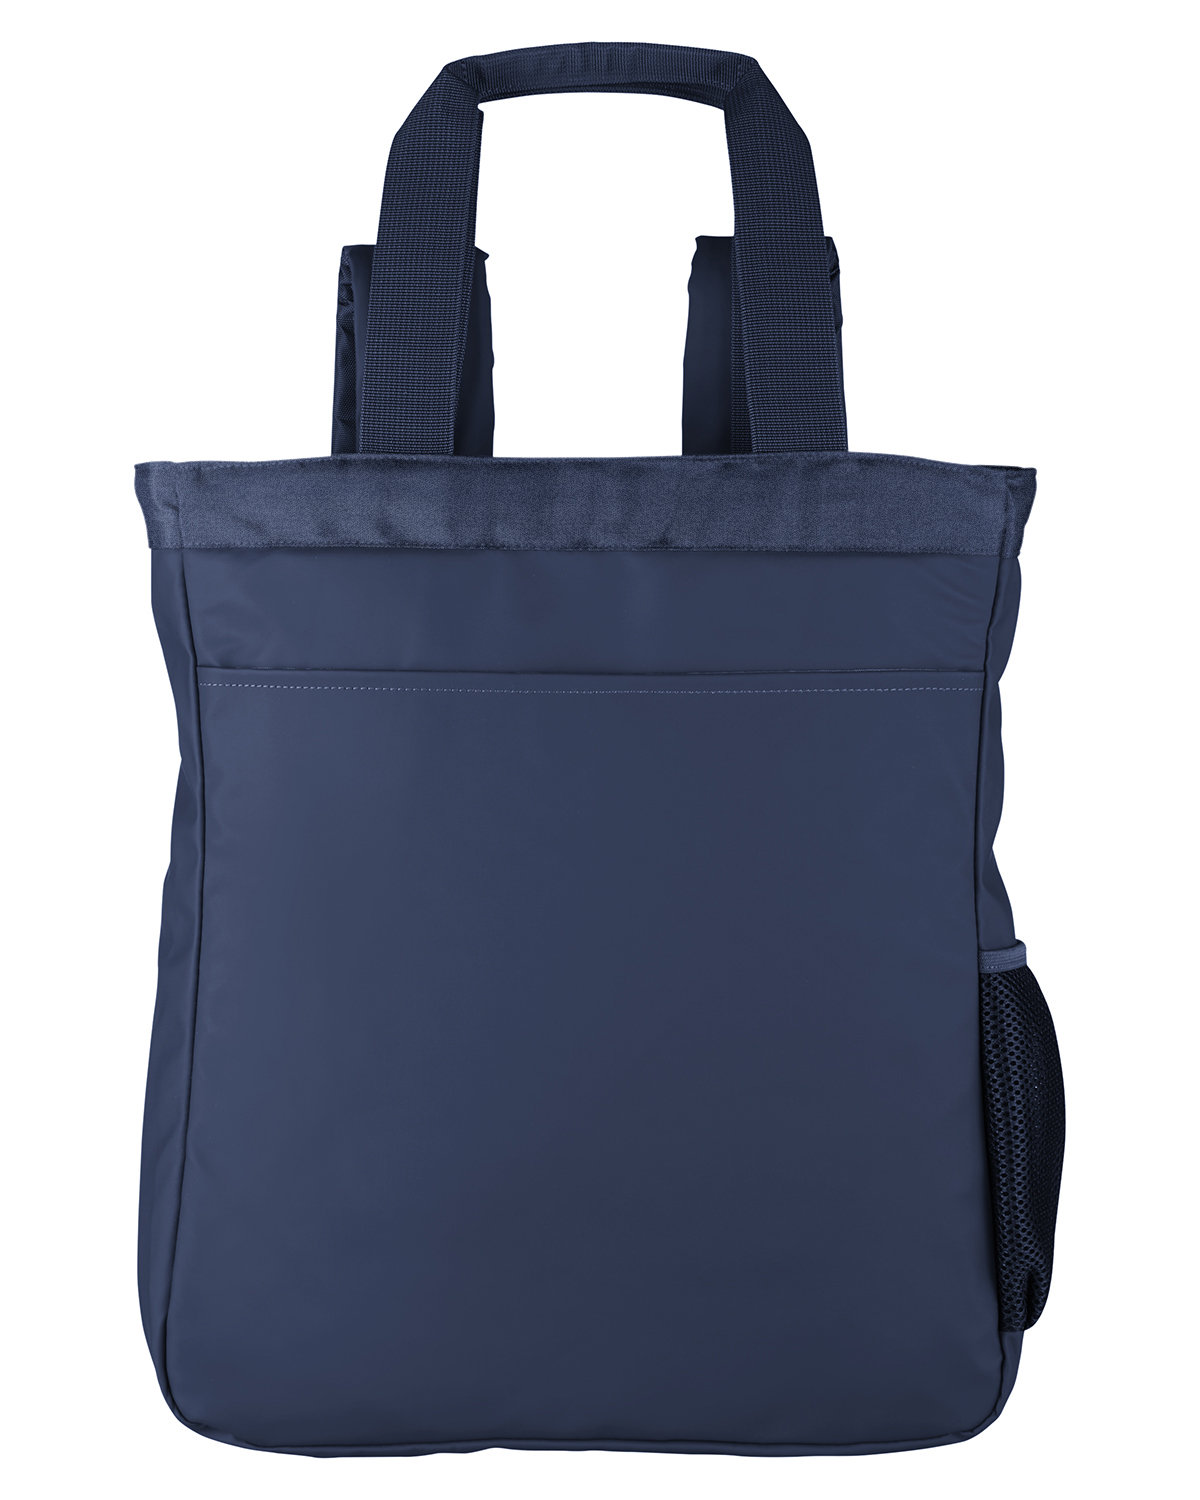 North End Convertible Backpack Tote